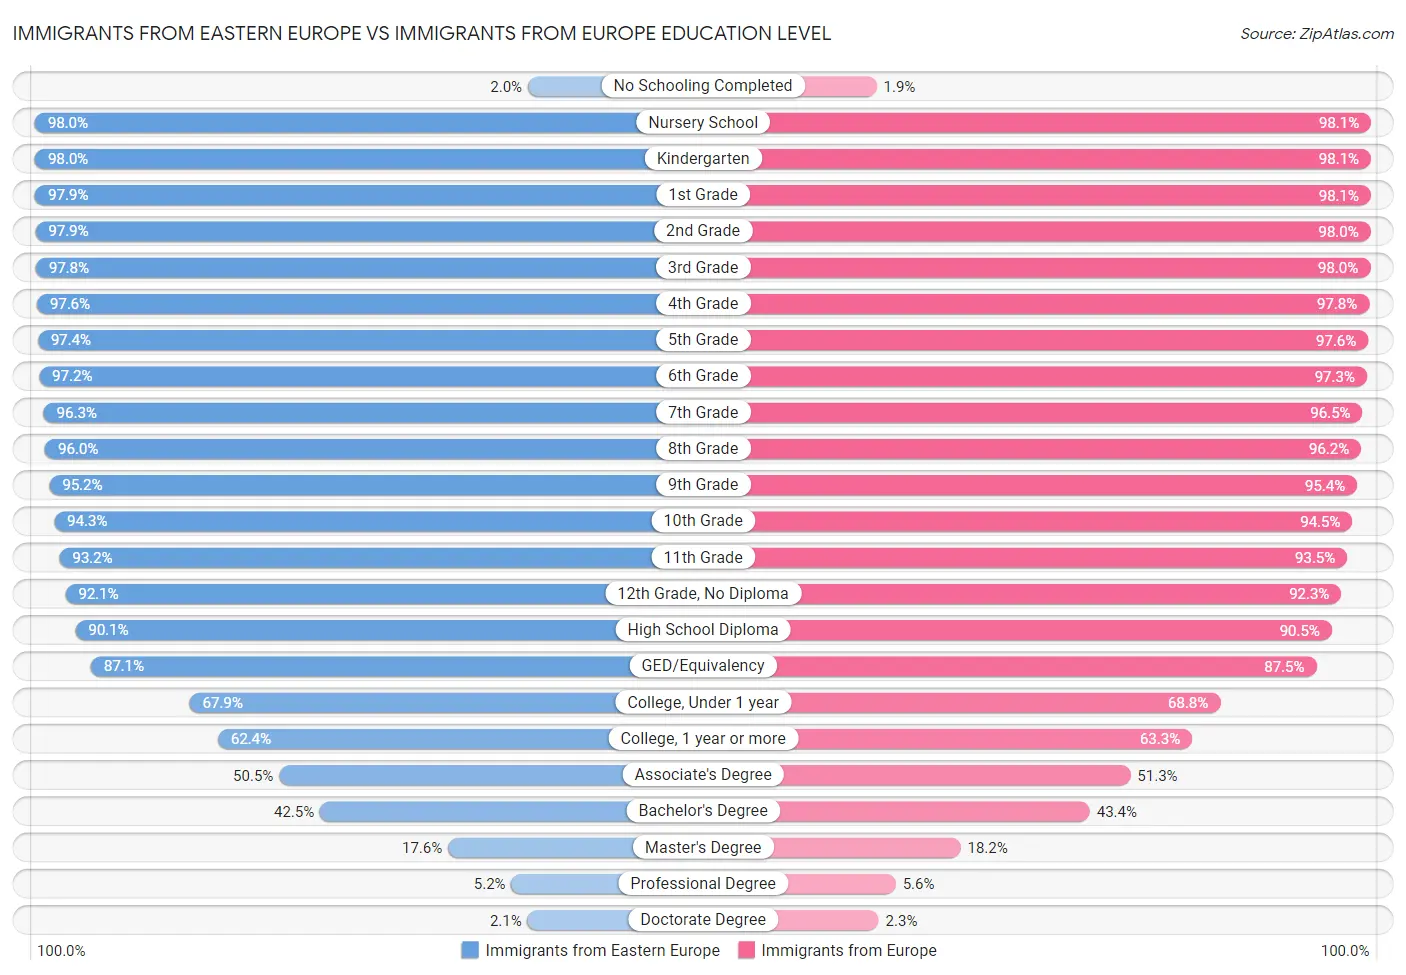 Immigrants from Eastern Europe vs Immigrants from Europe Education Level